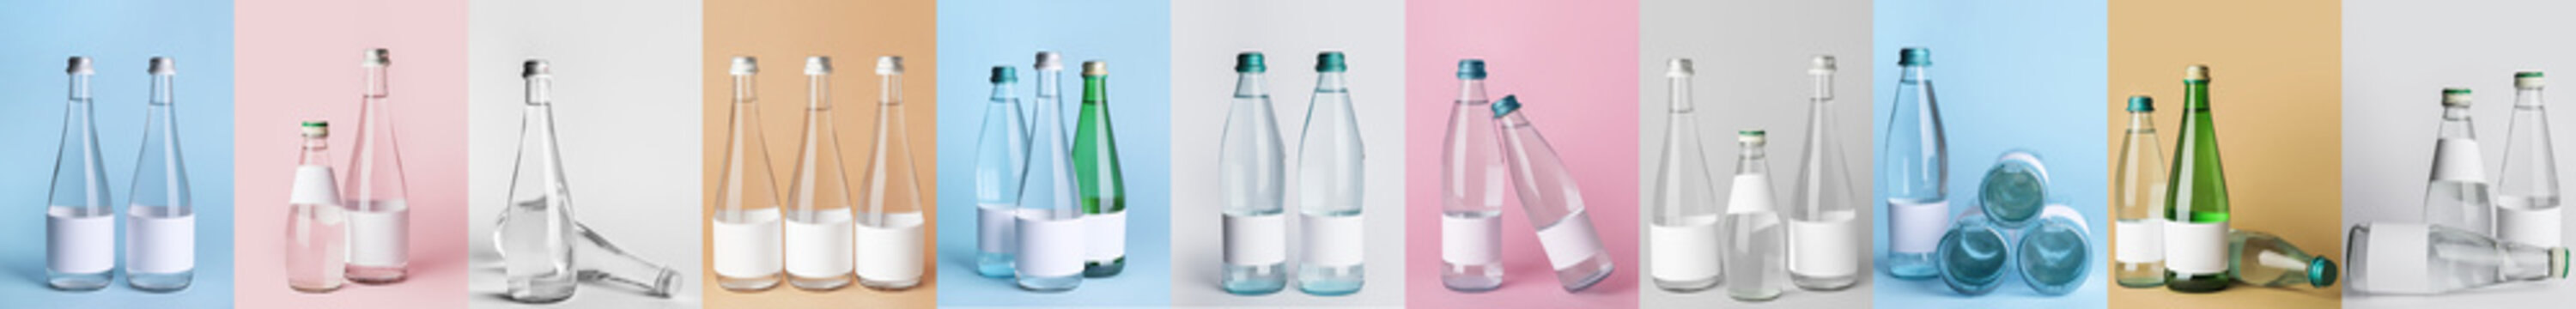 Collage of glass bottles of clean water